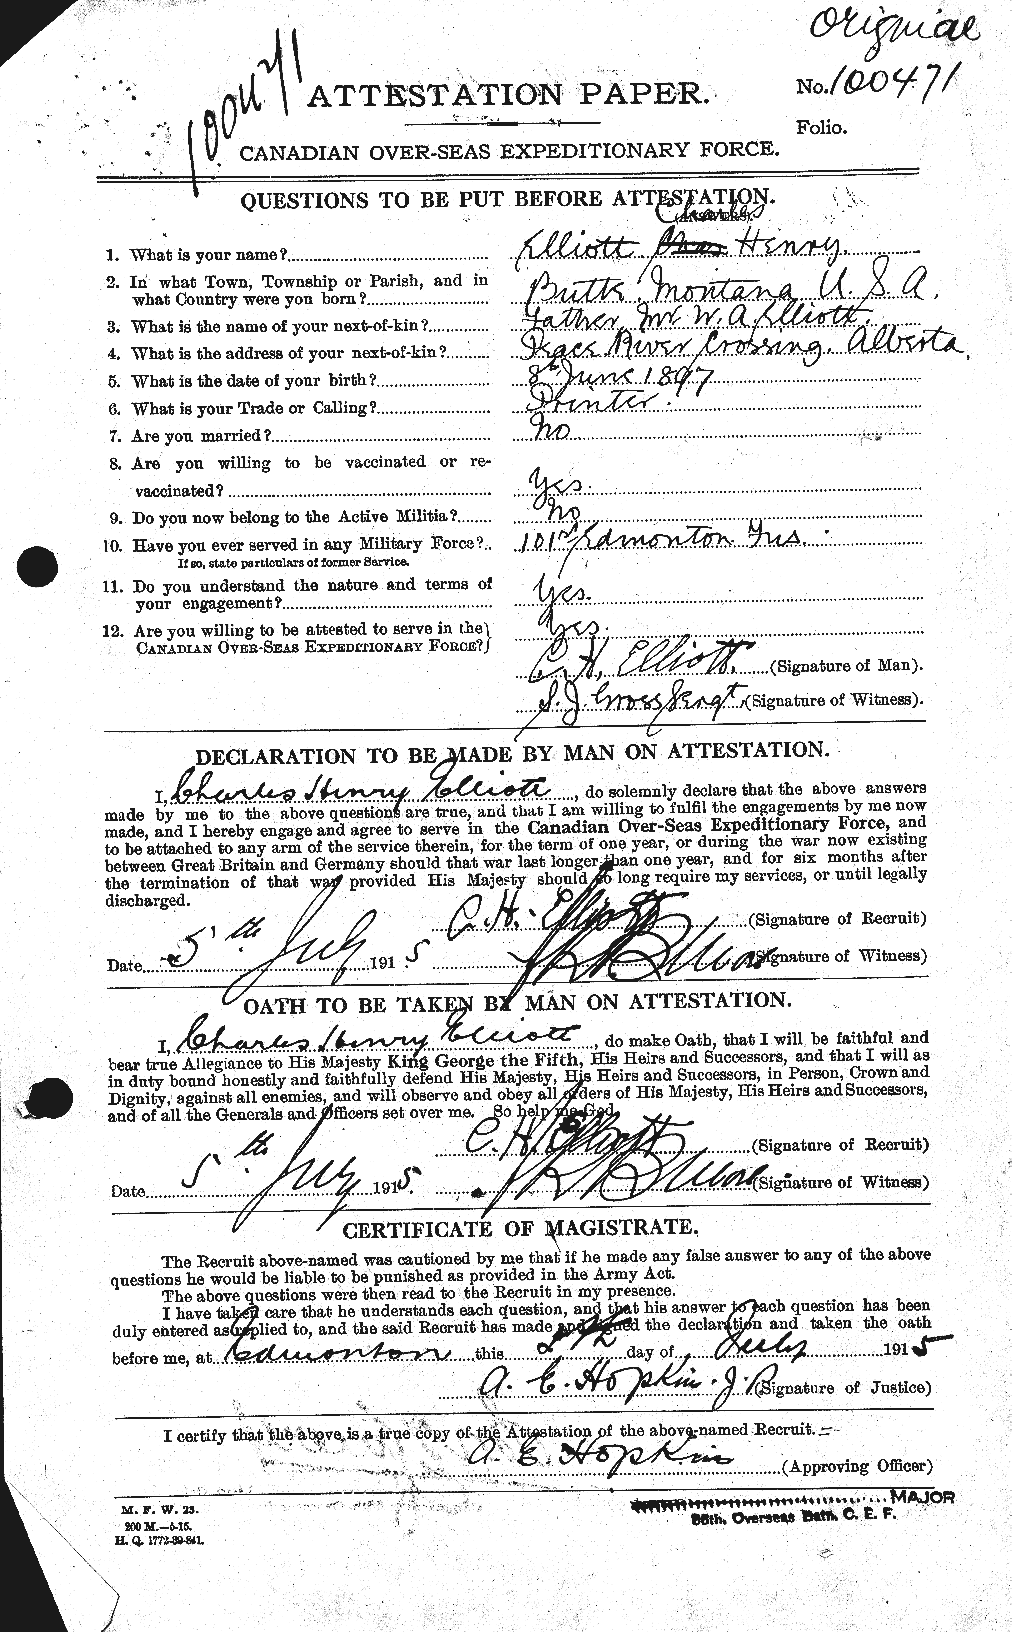 Personnel Records of the First World War - CEF 314337a